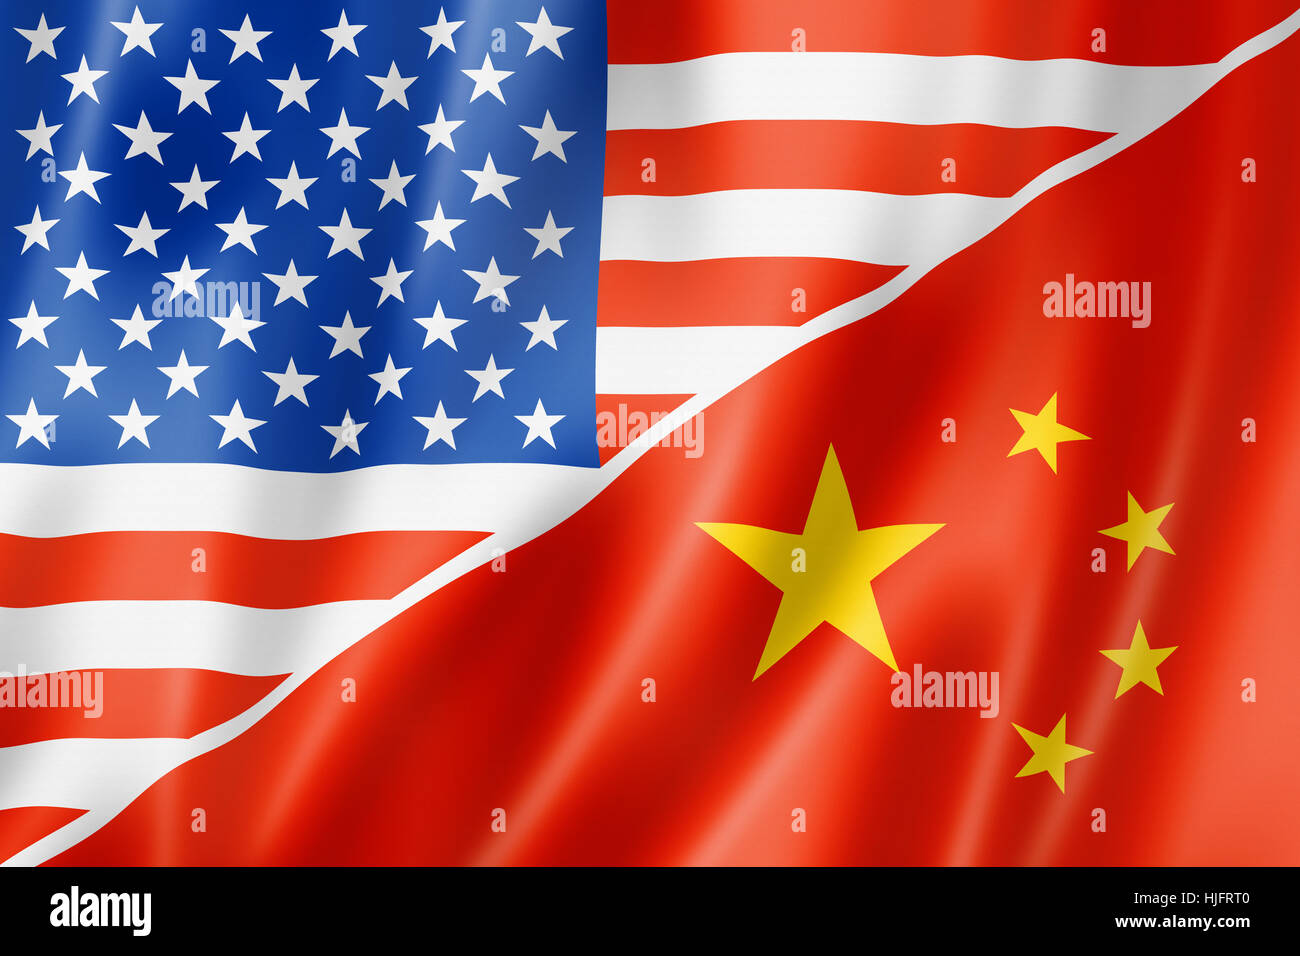 usa, america, flag, china, chinese, travel, model, design, project, concept, Stock Photo